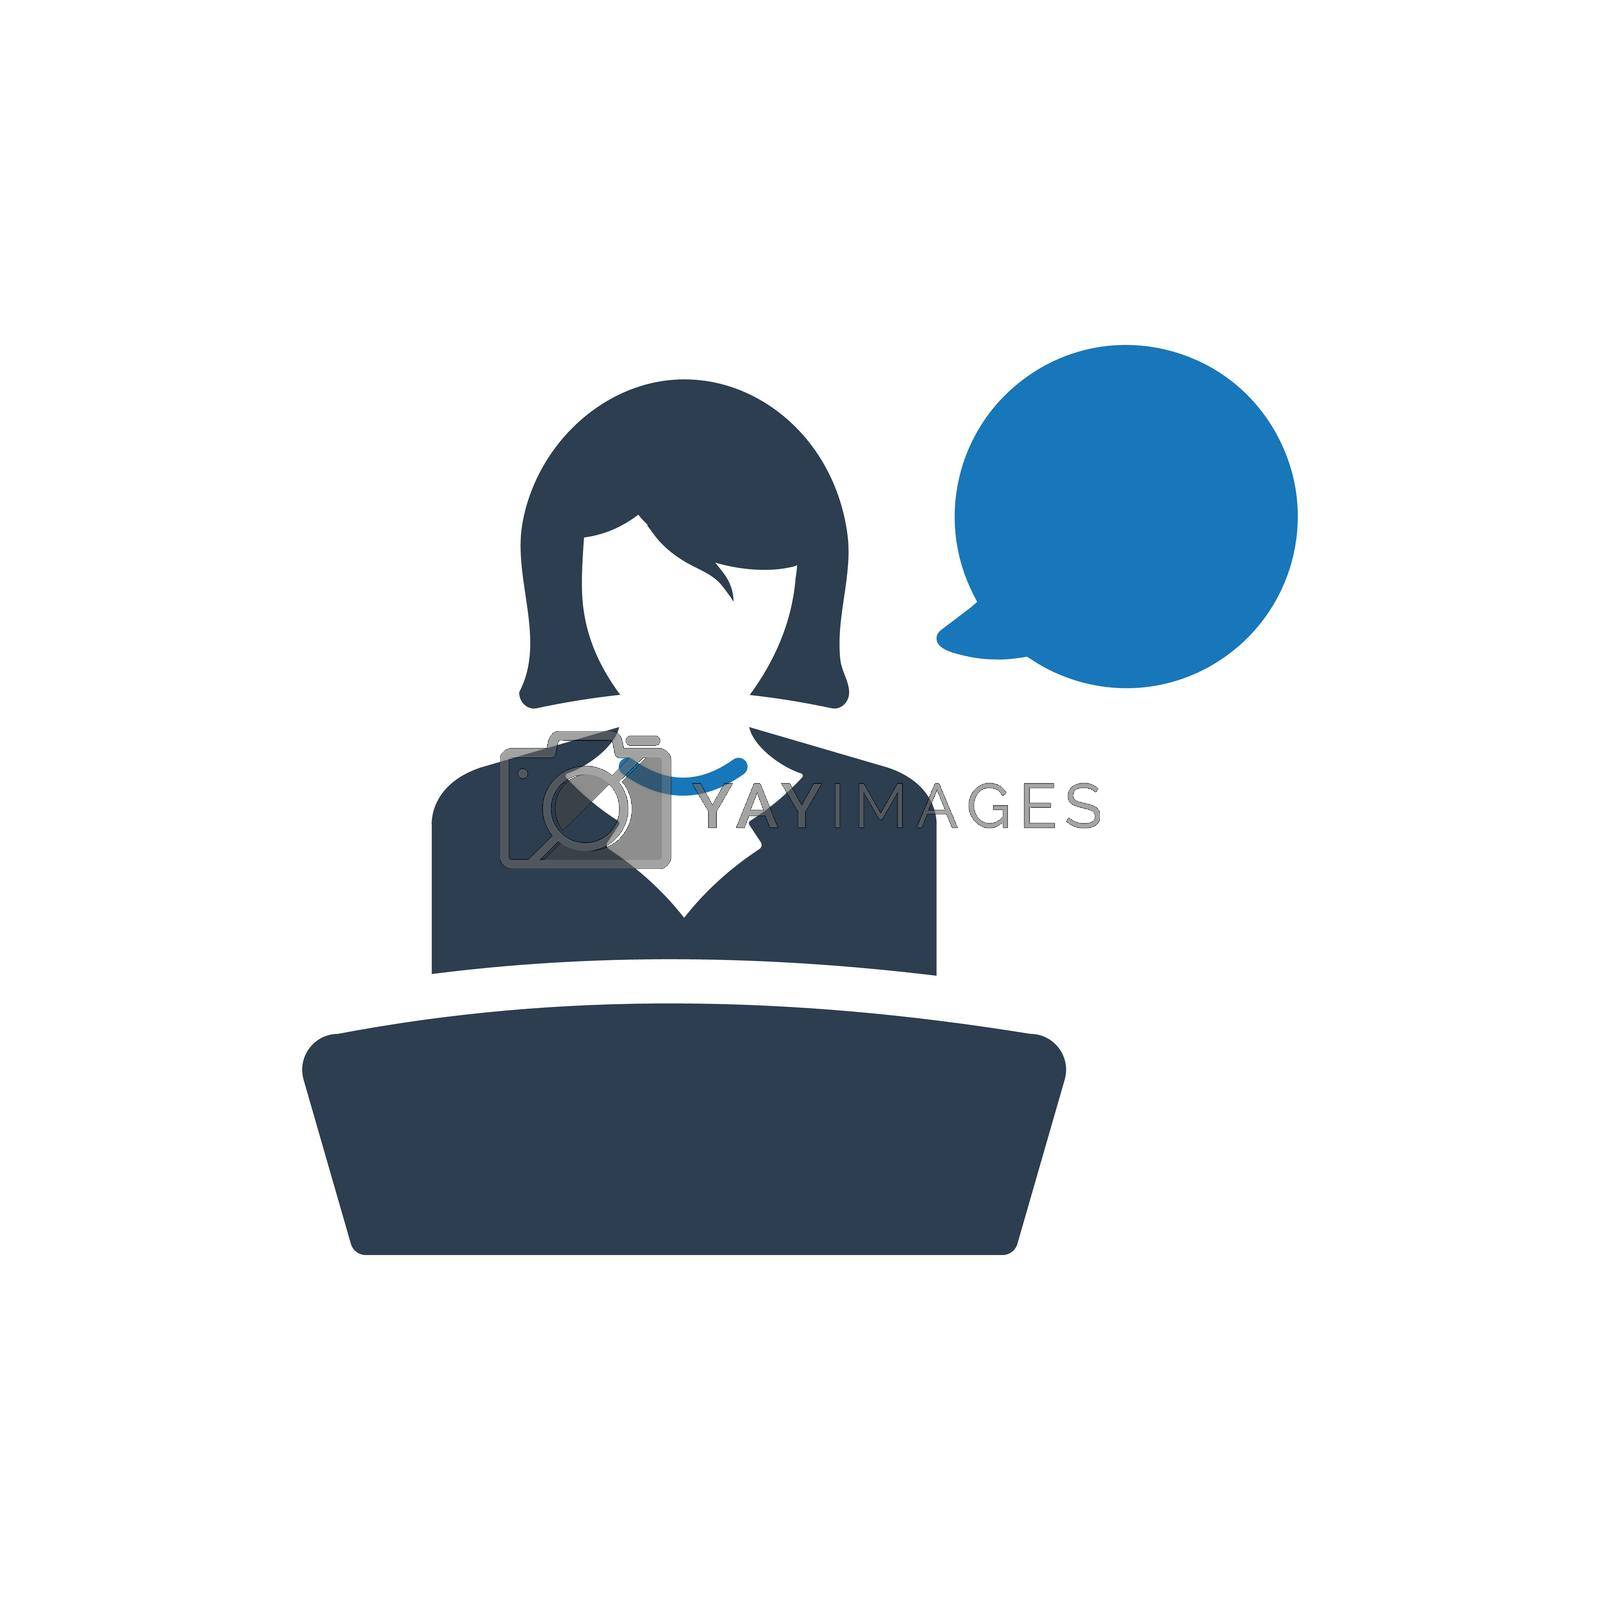 Royalty free image of Business Presentation Icon by delwar018